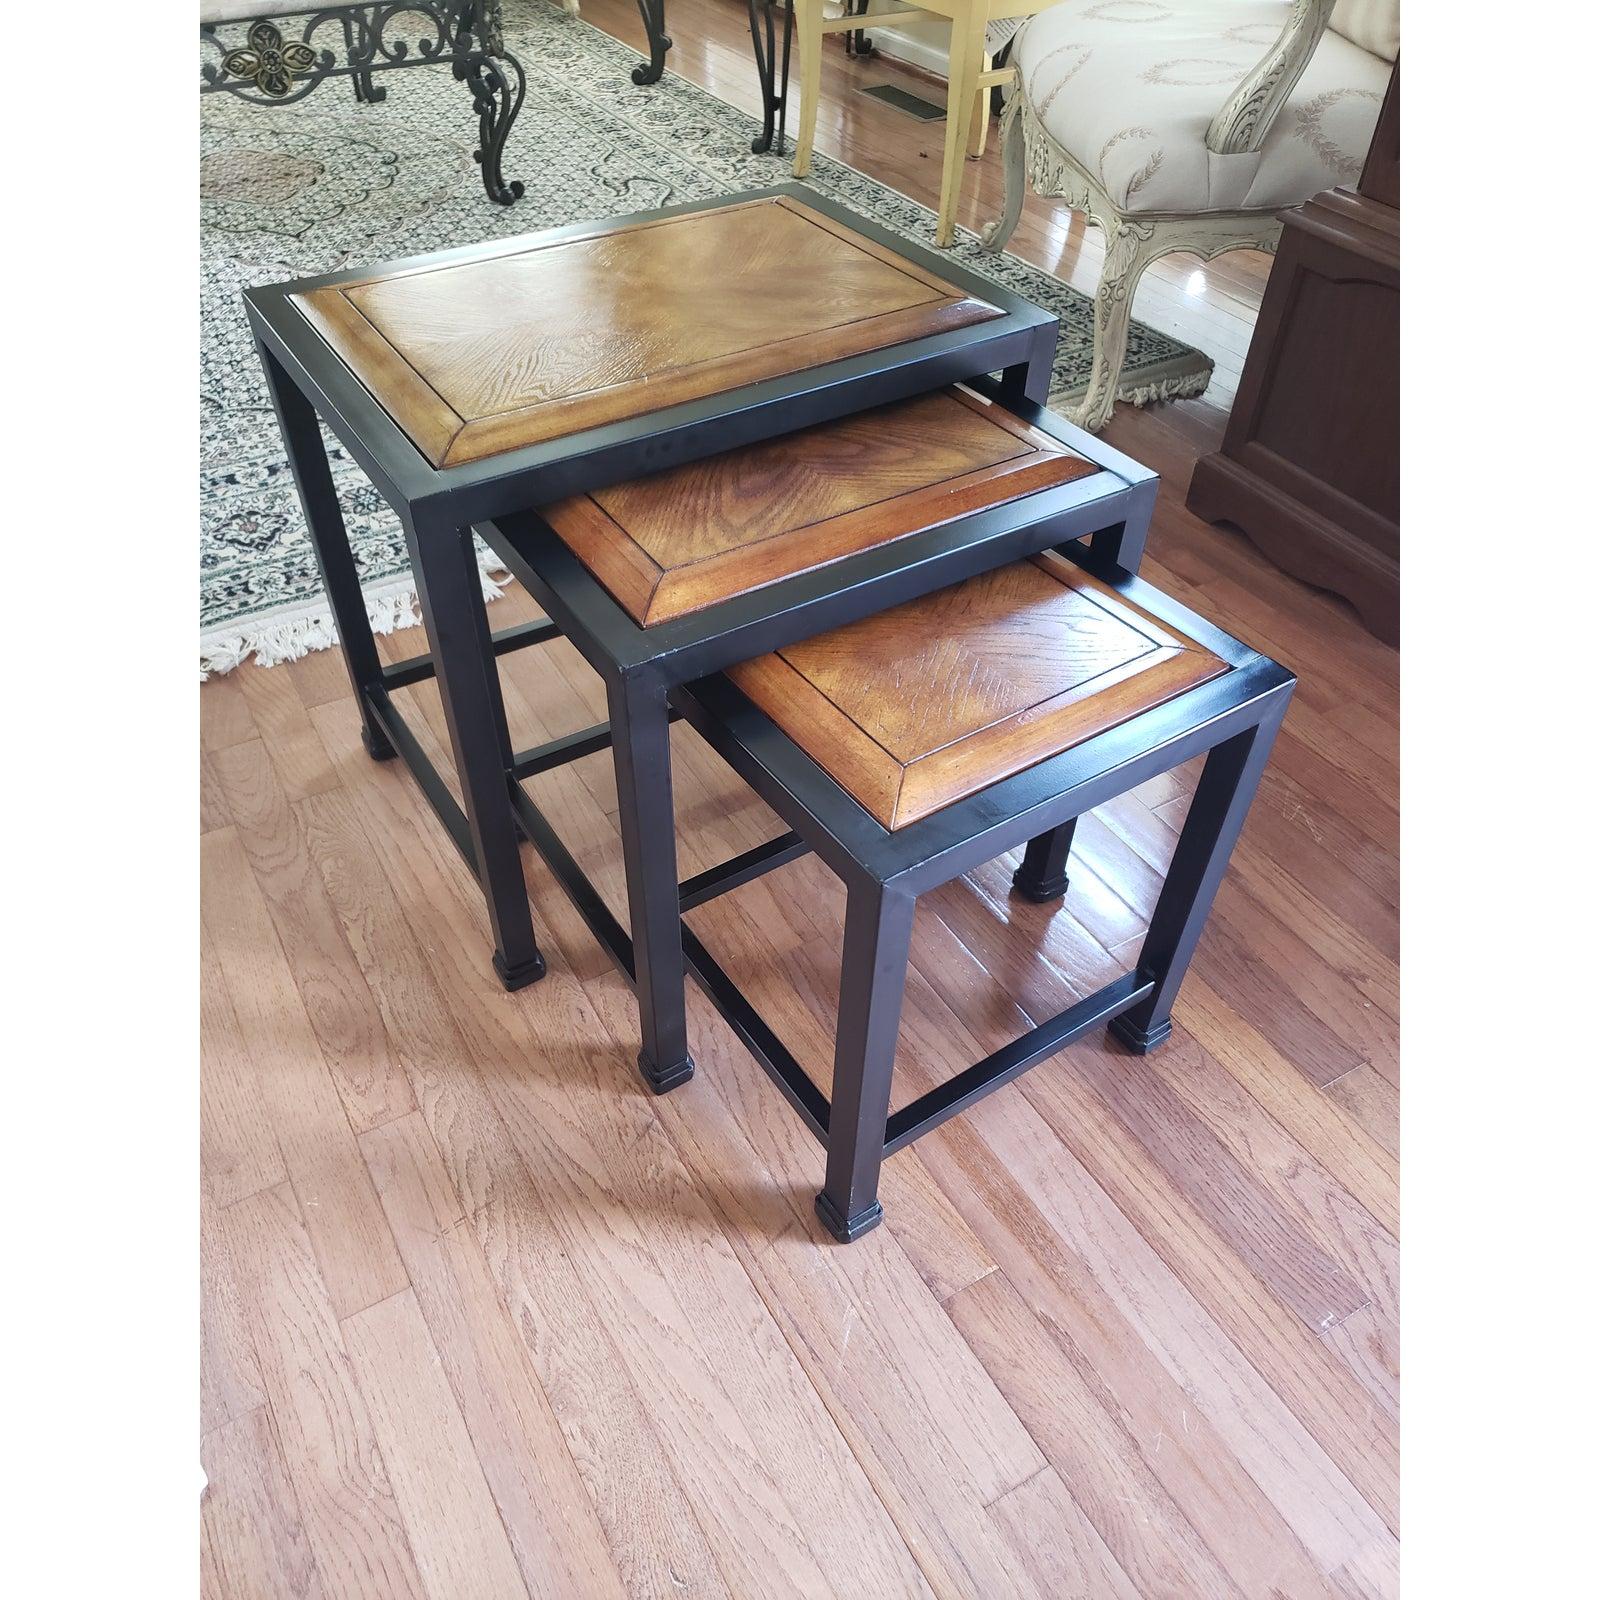 1990s Italian Metal and Wood Nesting Tables, Set of 3 For Sale 4